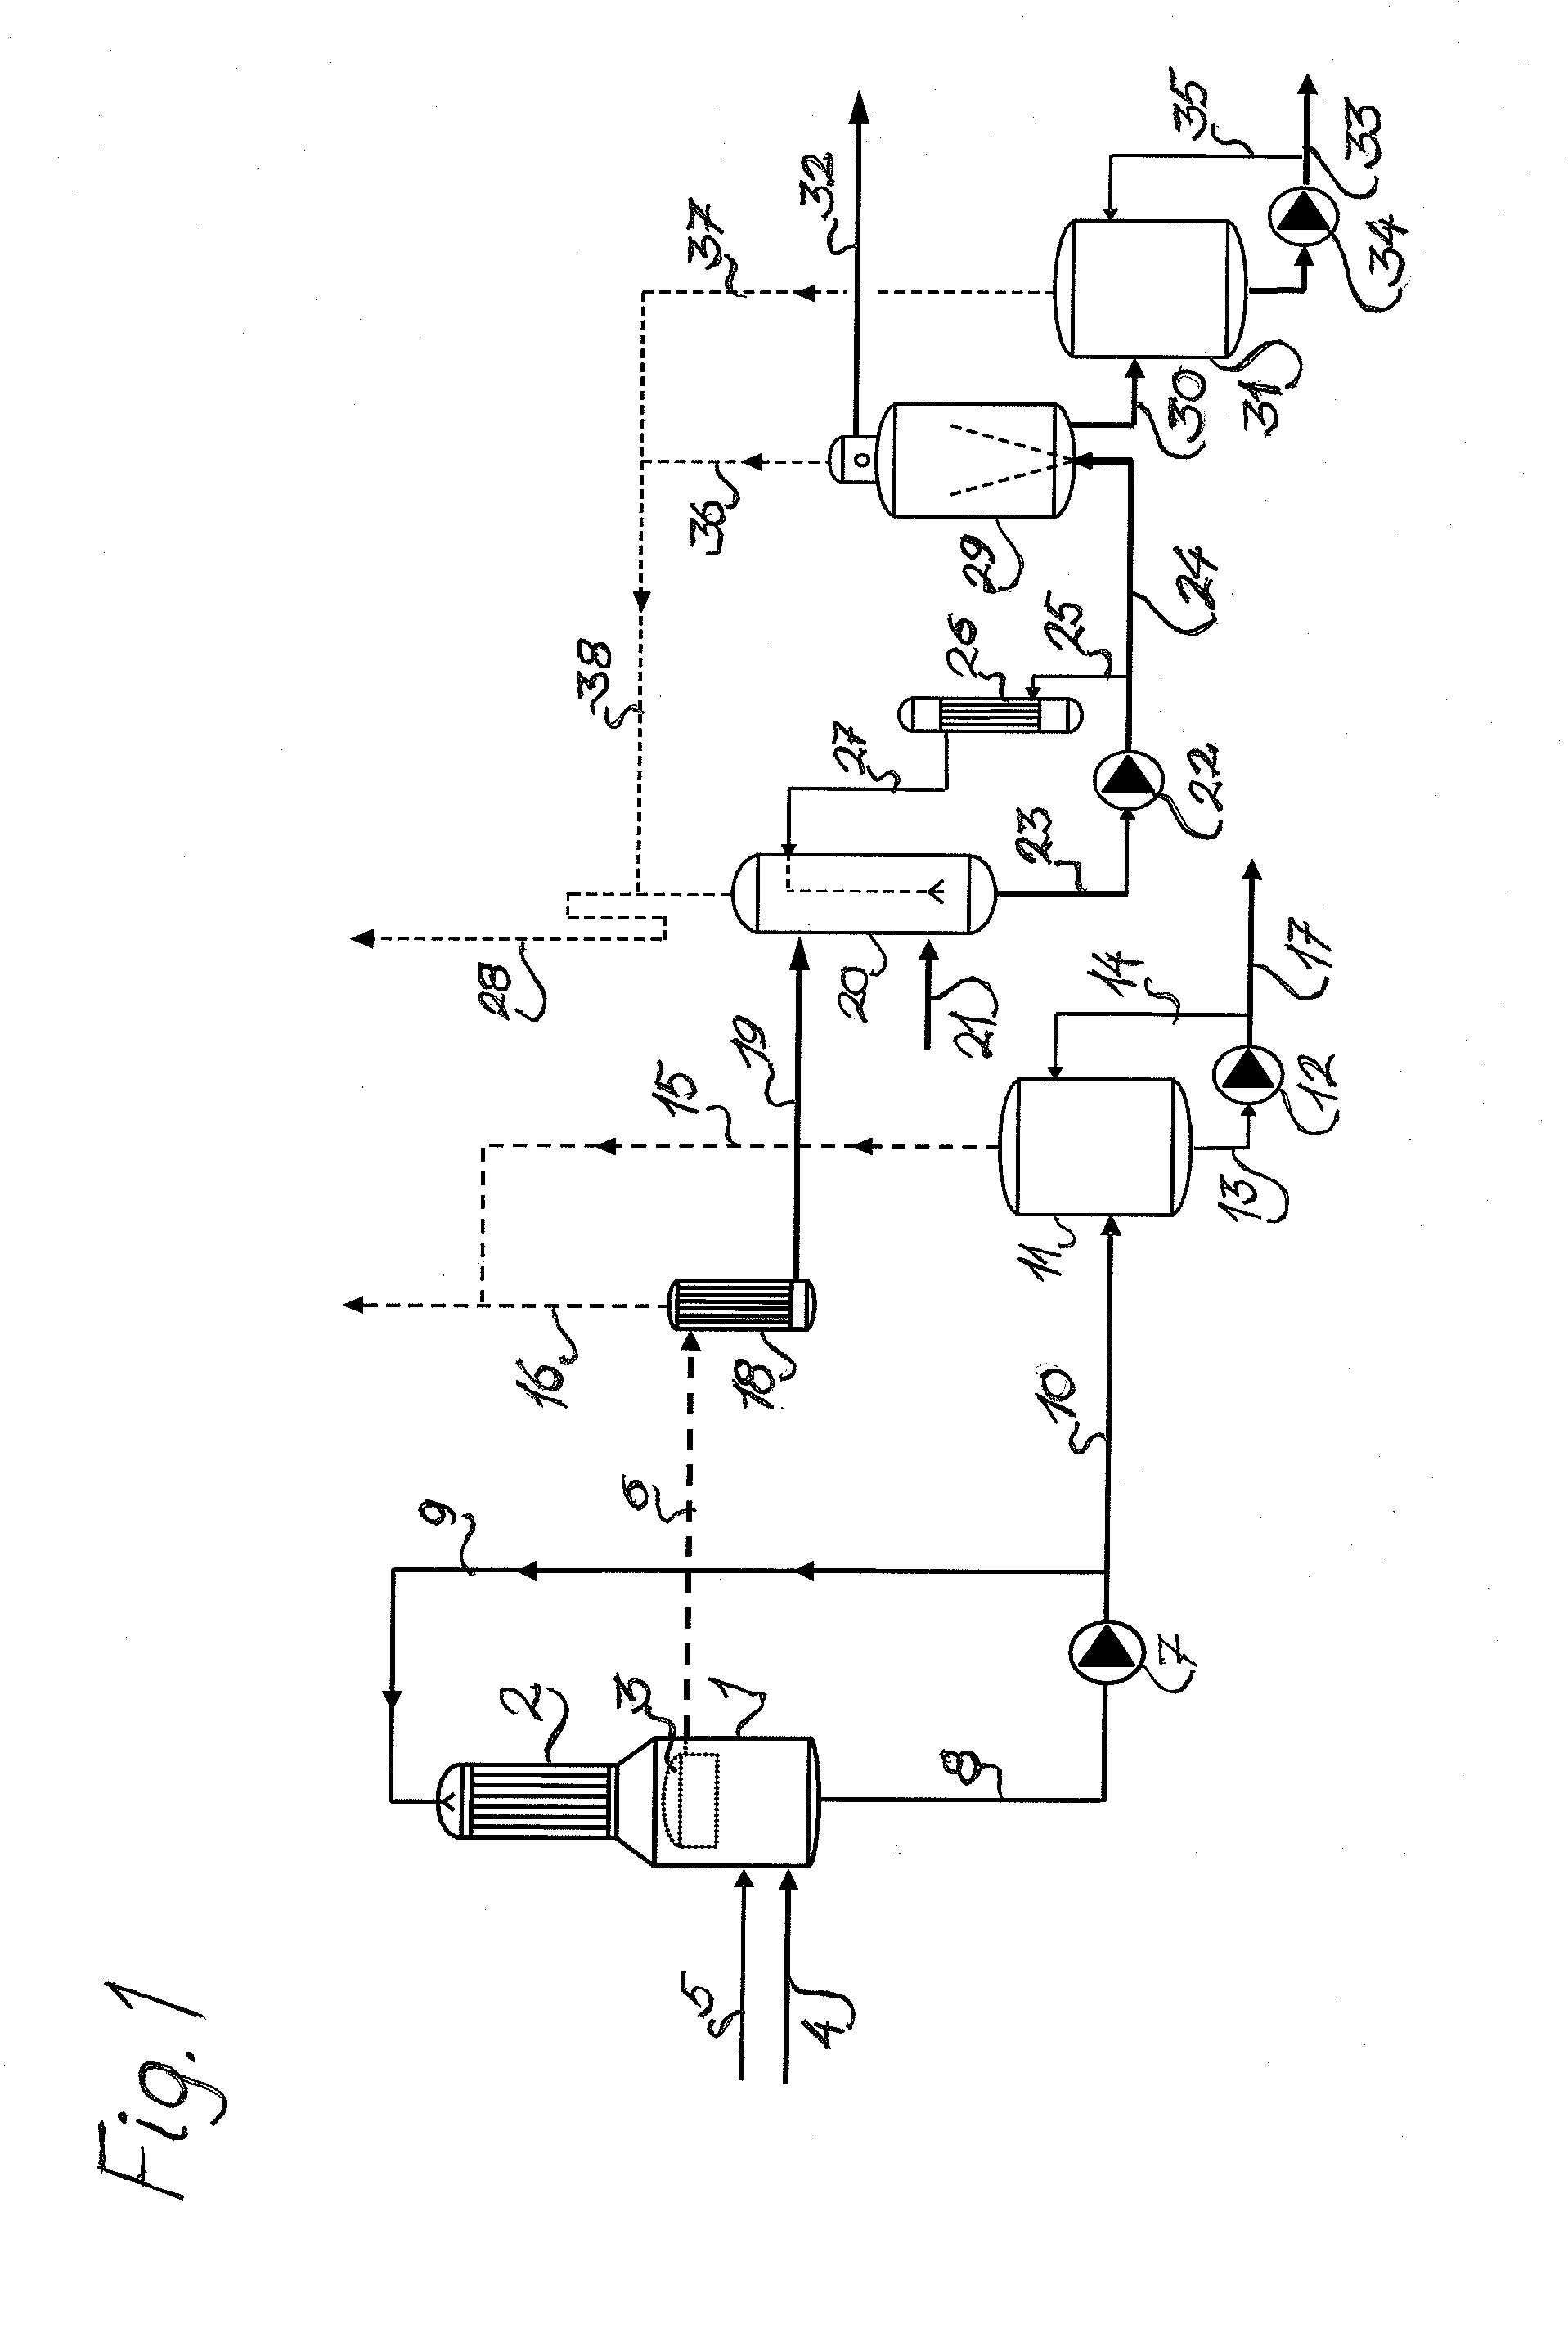 Method for extracting ammonium salt and methanol from a liquid obtained from foul condensates in a cellulose pulp mill